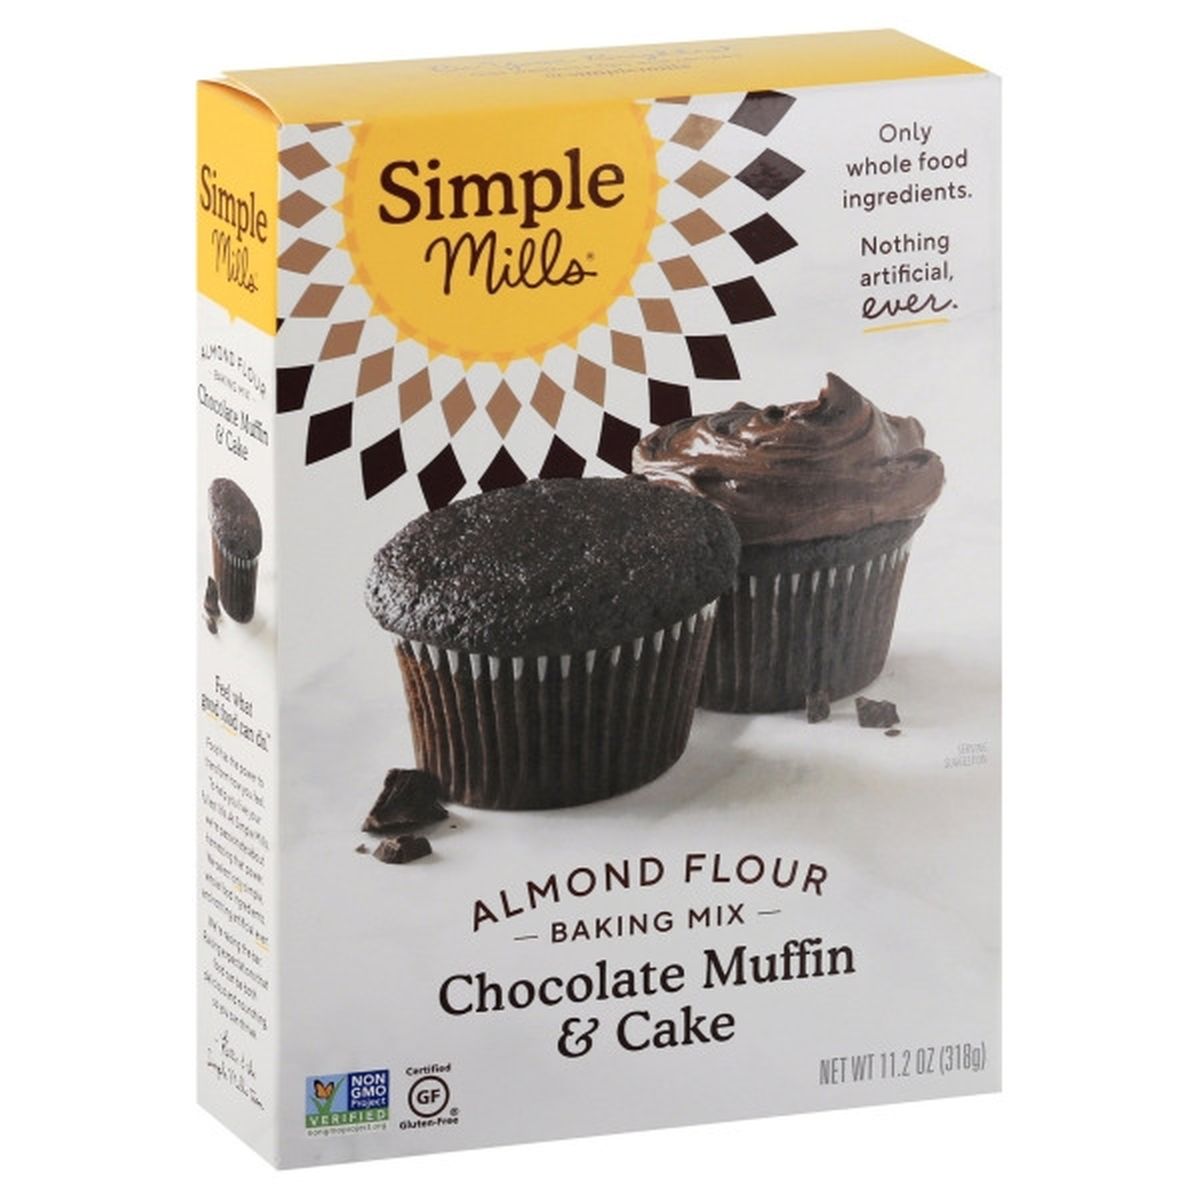 Calories in Simple Mills Baking Mix, Almond Flour, Chocolate Muffin & Cake